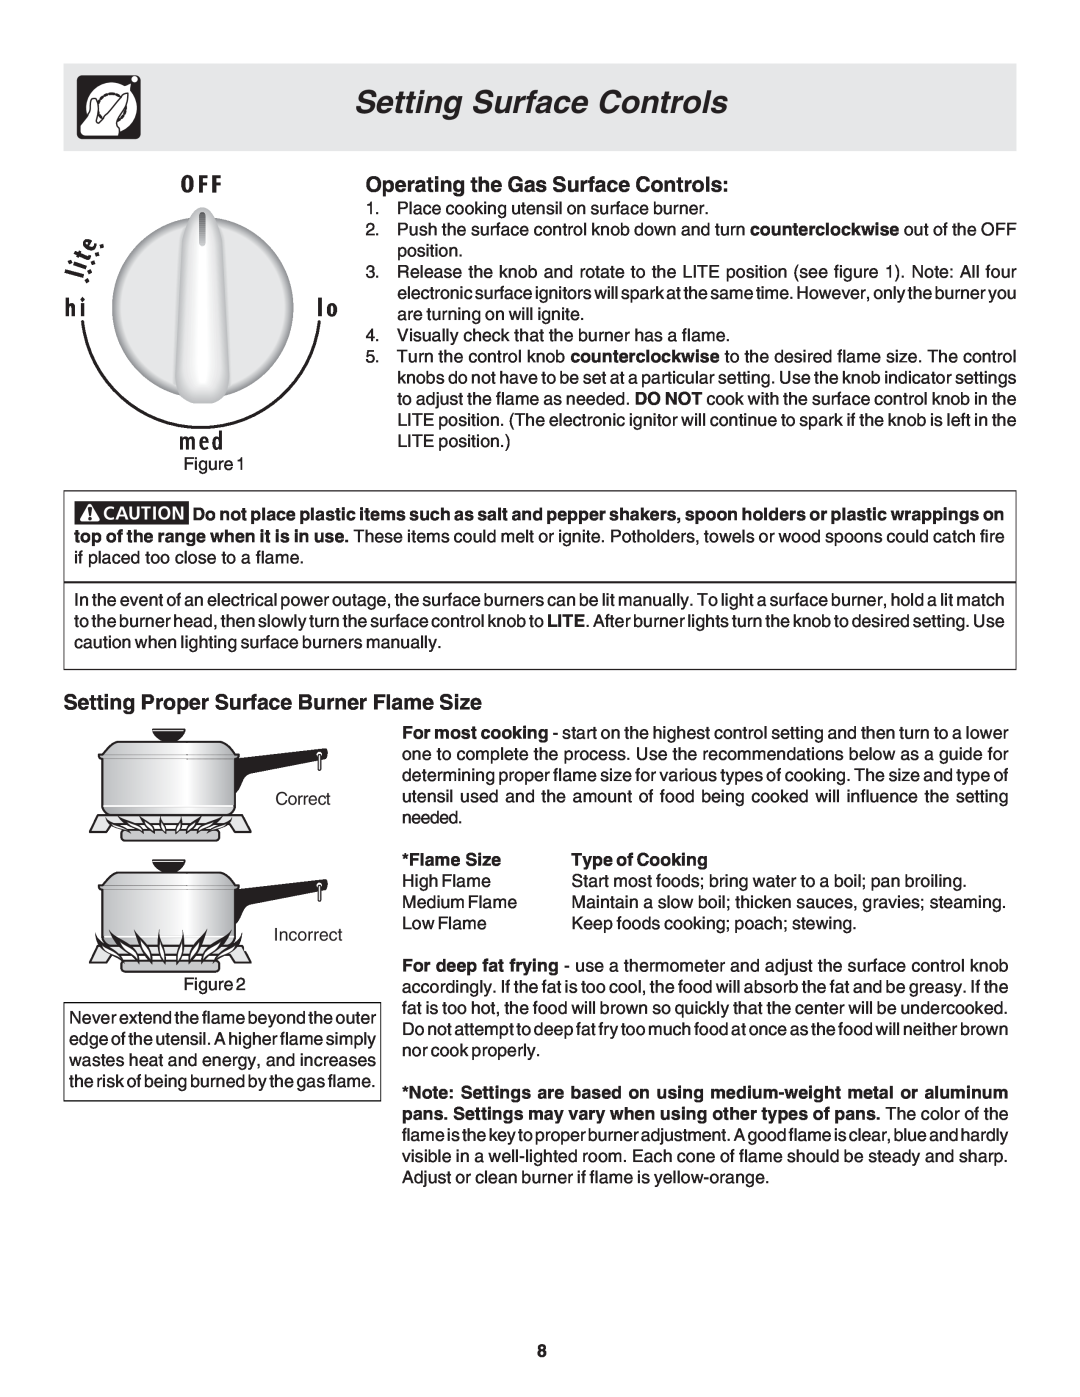 Frigidaire 318203863 warranty Setting Surface Controls, Operating the Gas Surface Controls 